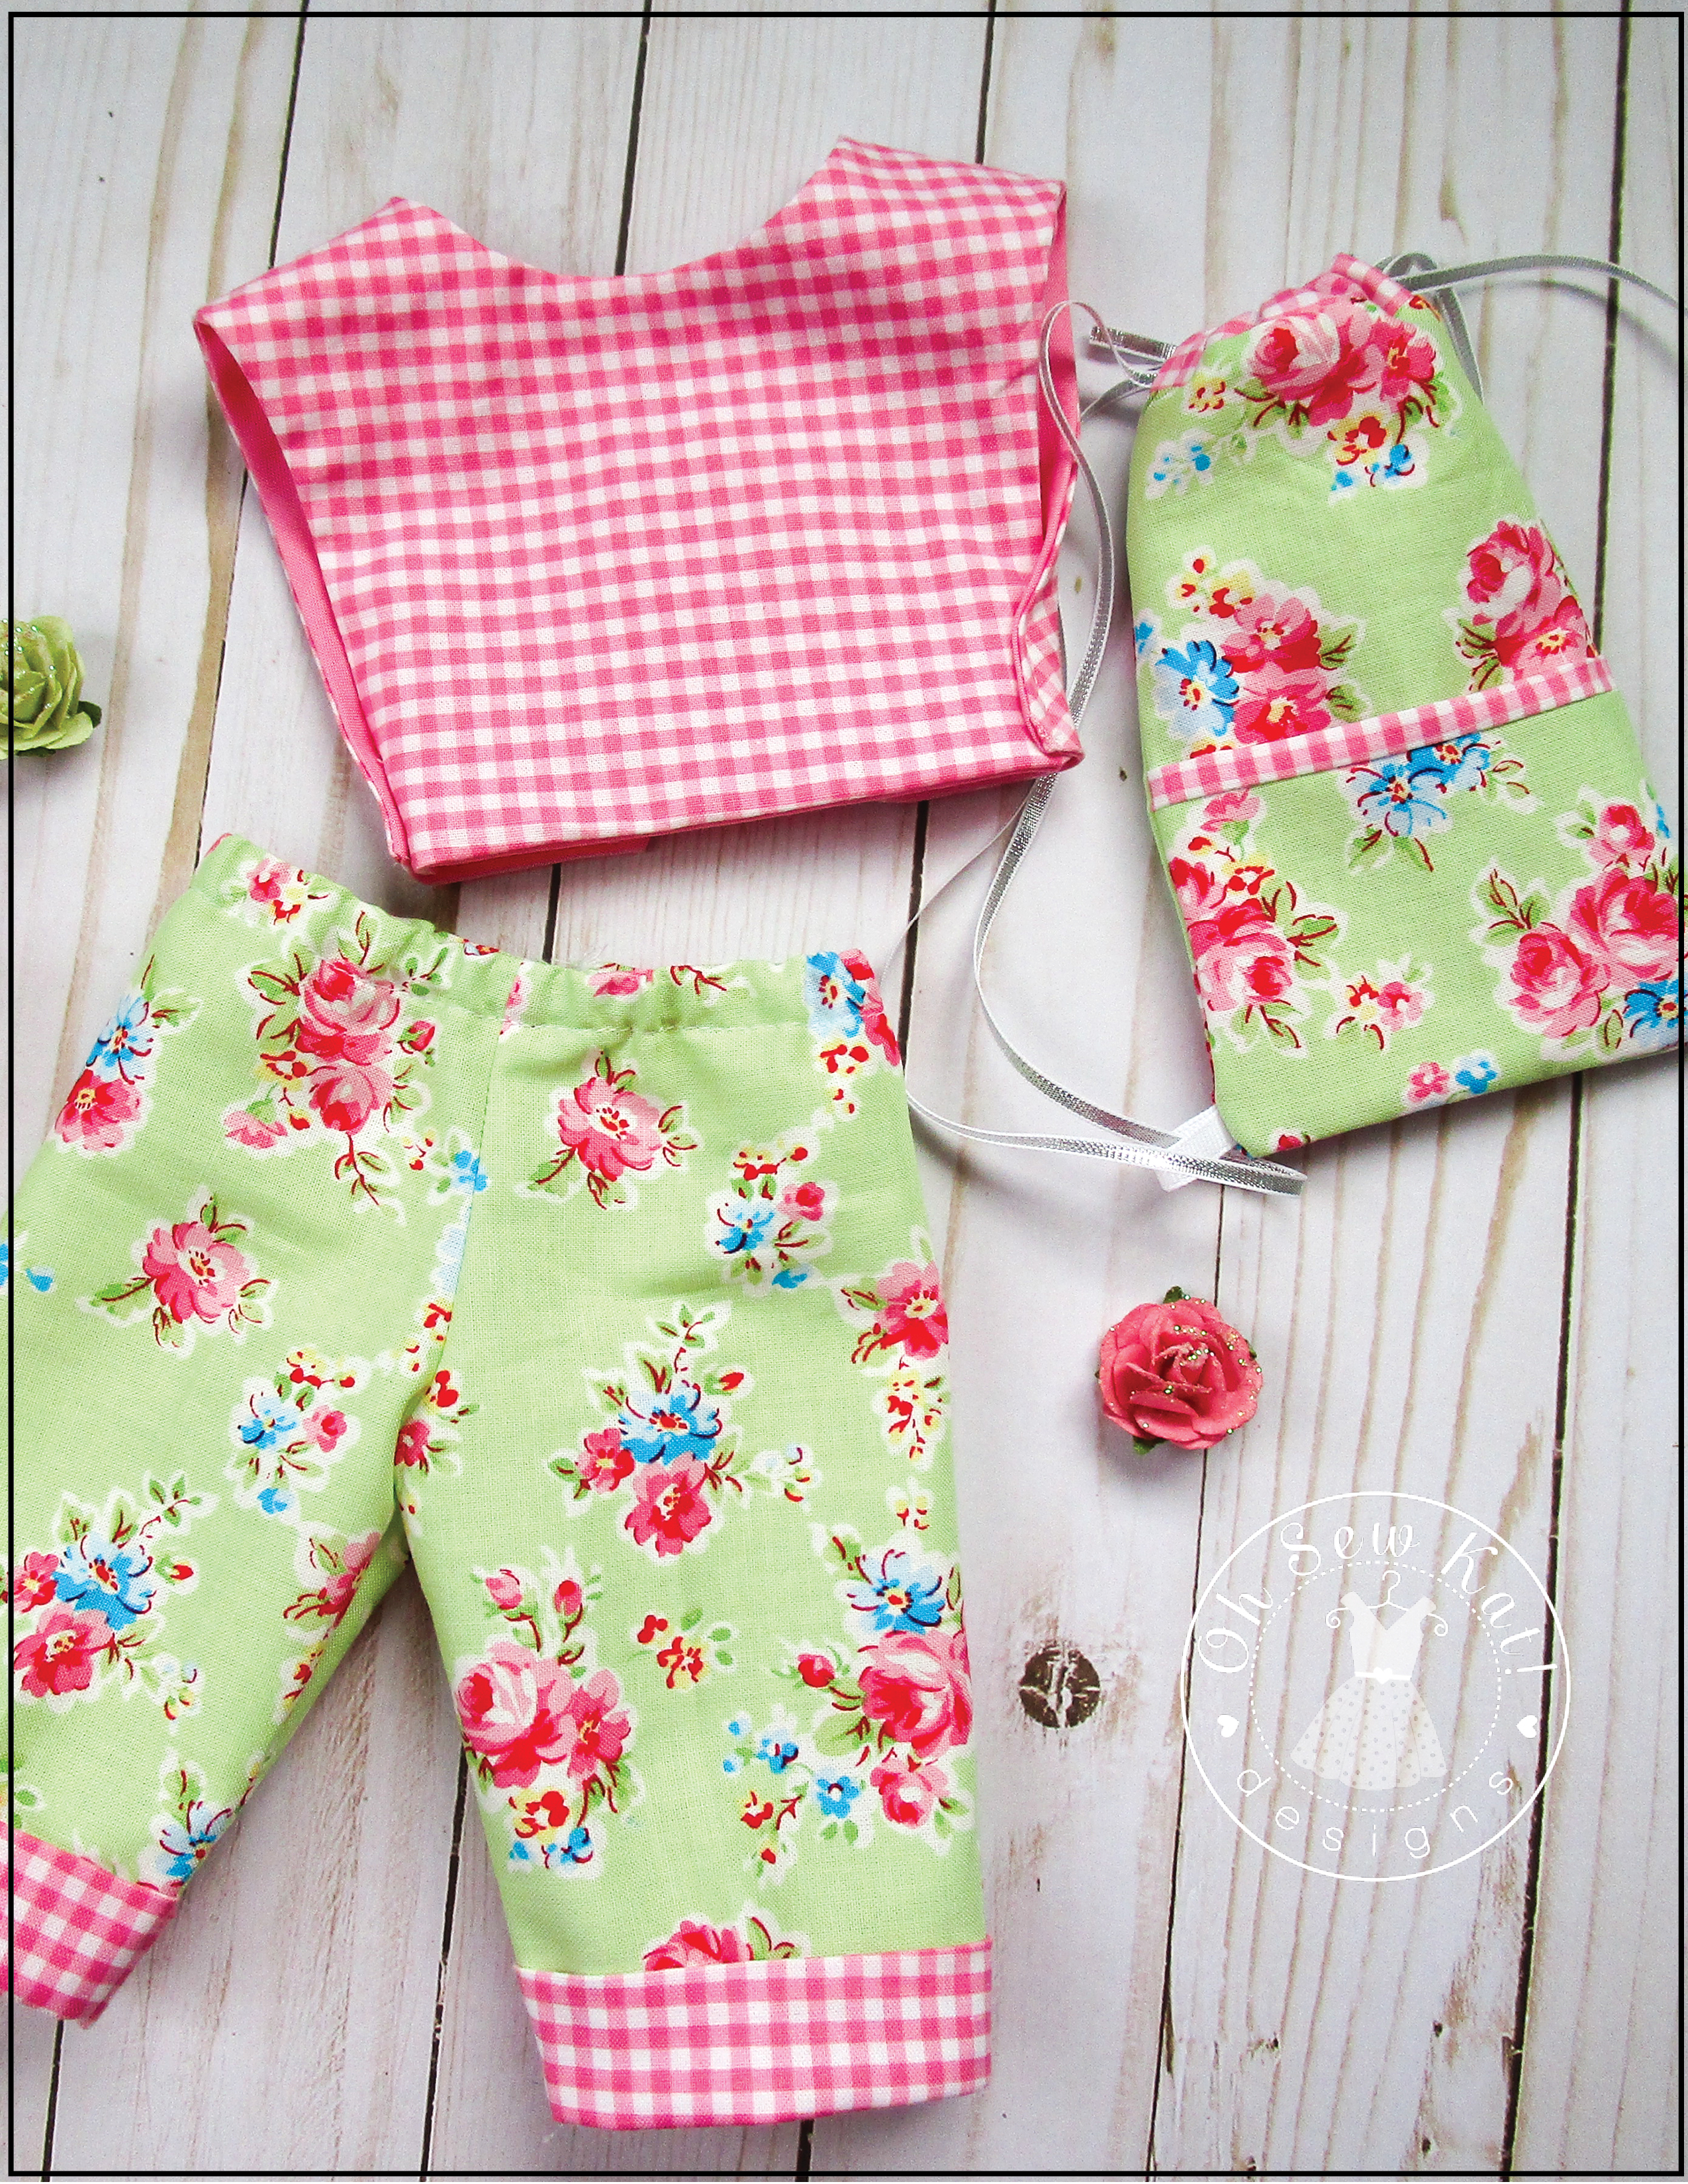 Make this super quick and easy Picnic Play outfit for your 18 inch doll with the PDF digital sewing pattern from OhSewKat. Fat quarter friendly, quick sewing project to make 18 inch doll capris, backpack and simple shirt. Find more patterns in the OHSewKat etsy Shop.